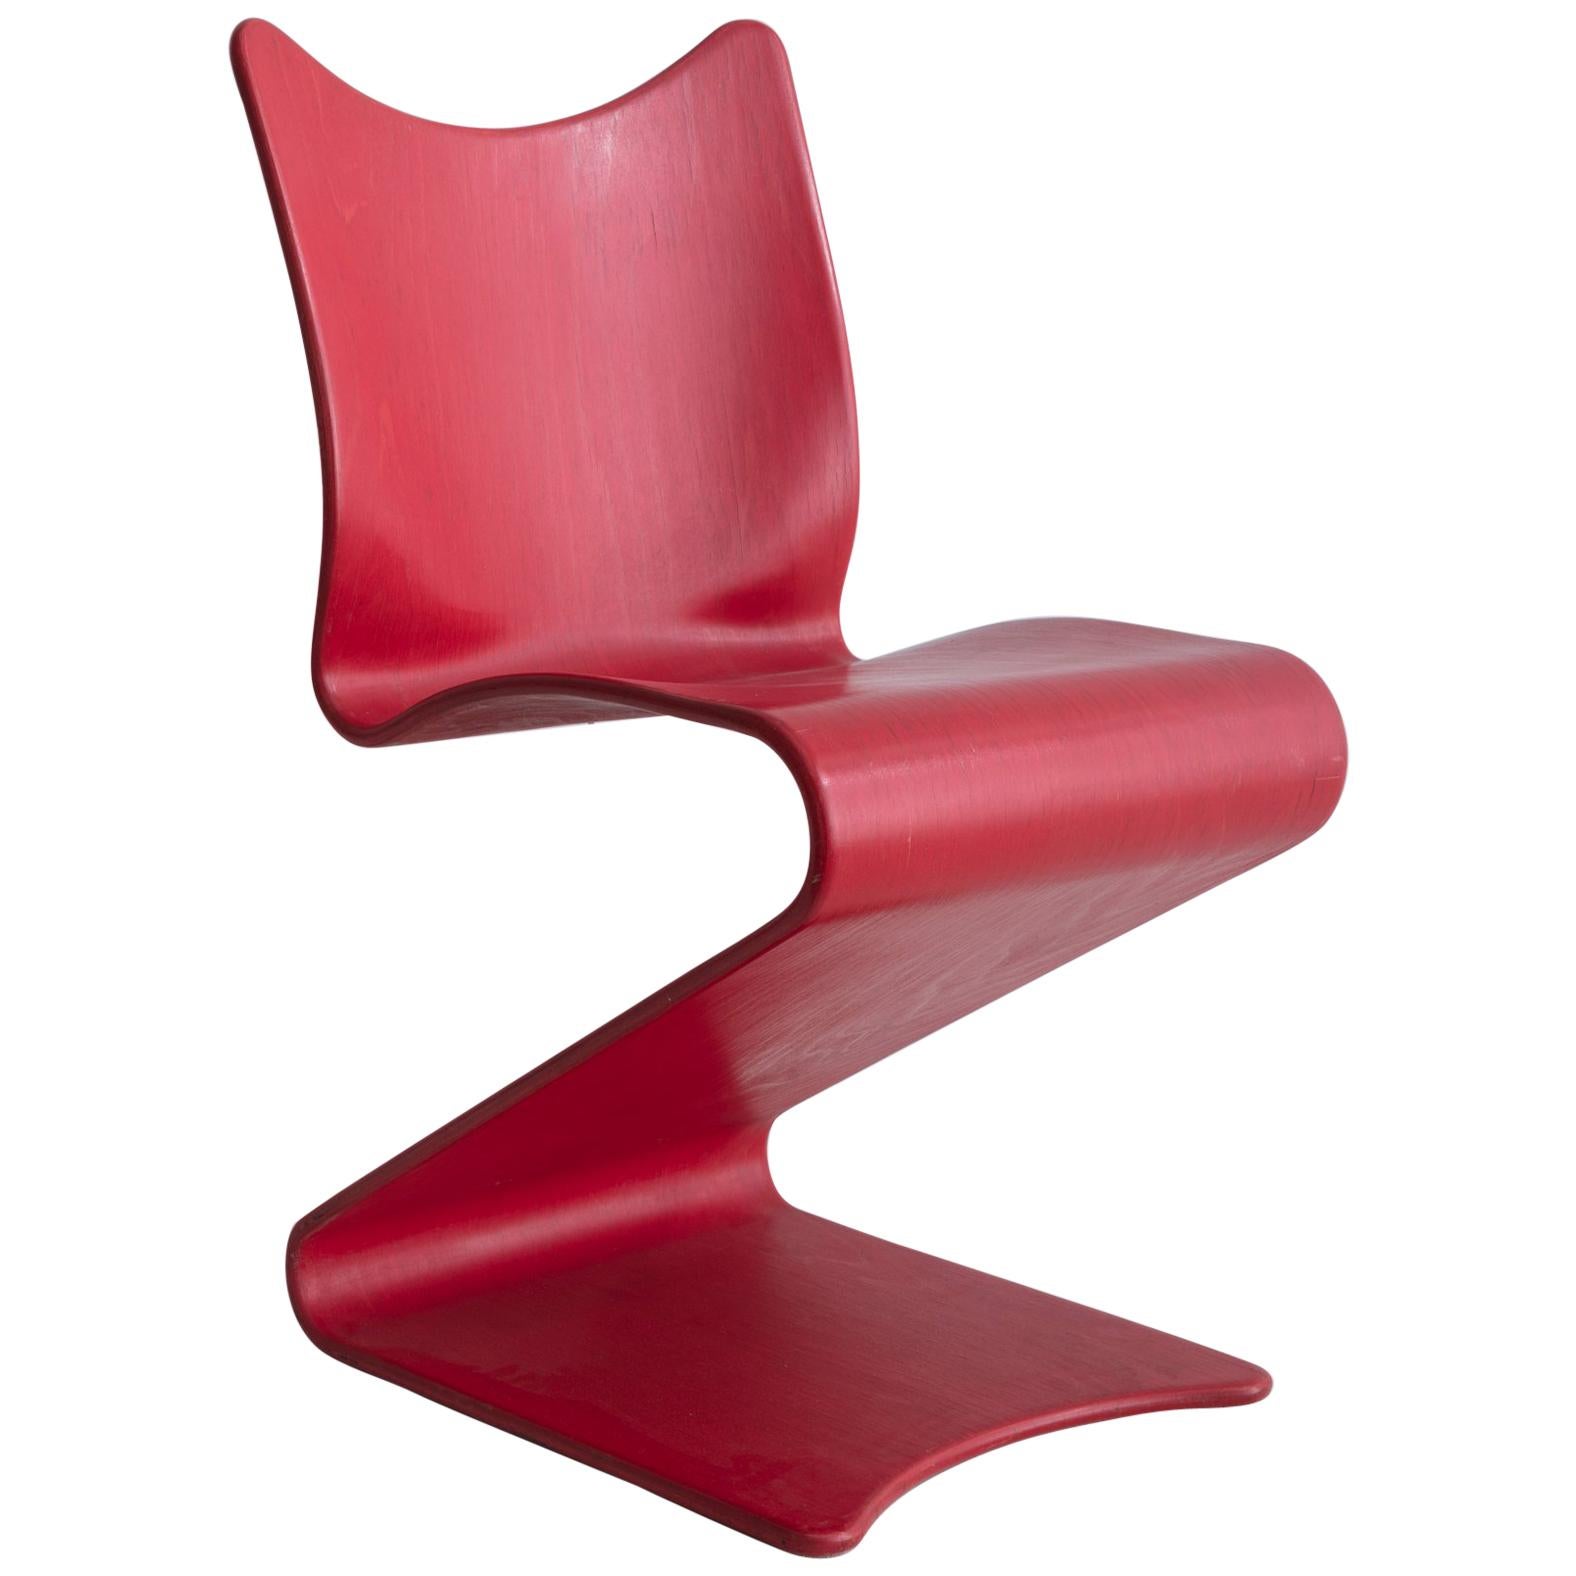 S-Chair No. 275 in Red by Verner Panton, 1956